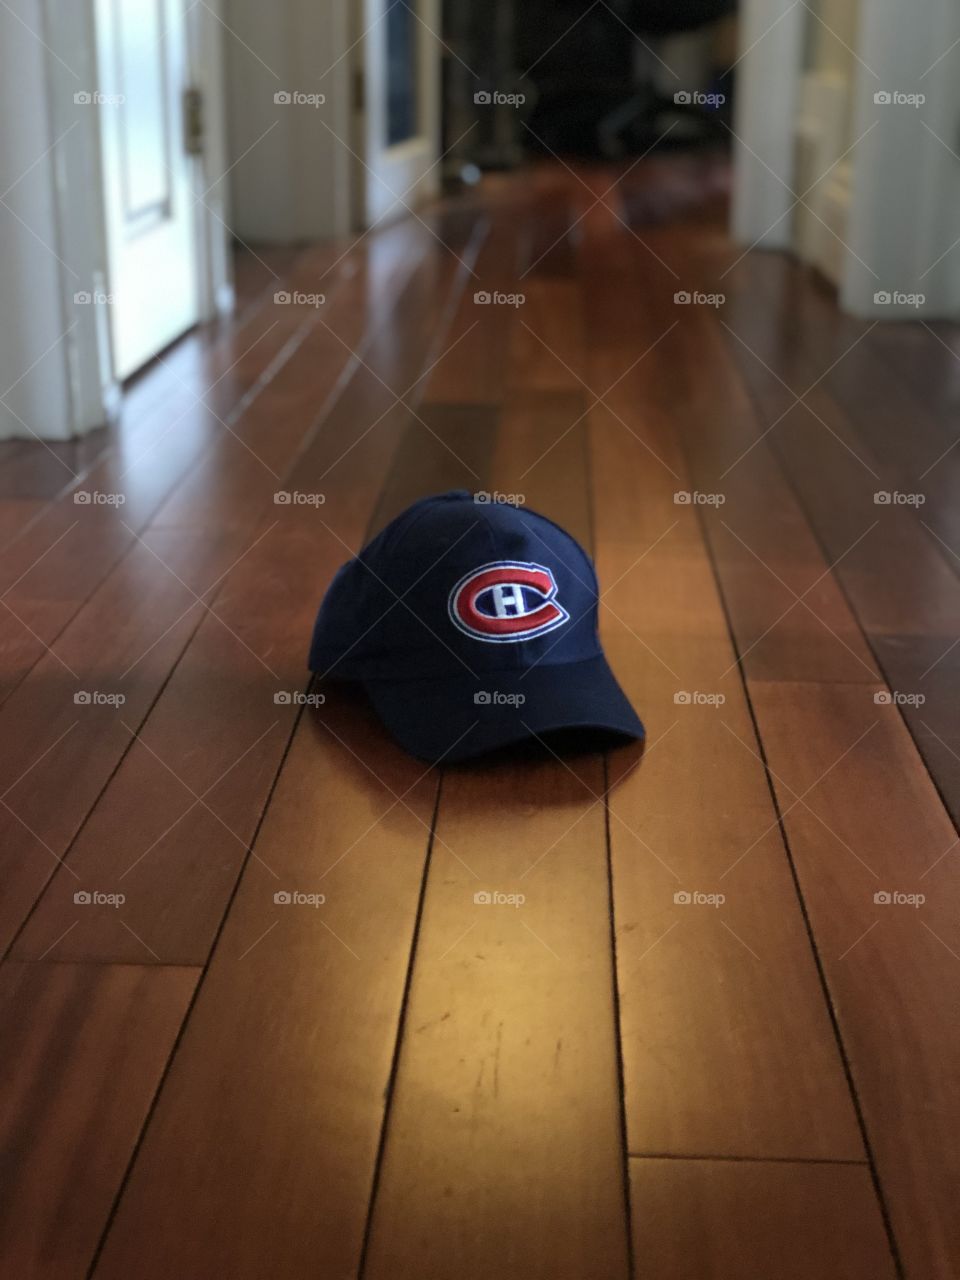 Montreal Canadiens hat on display in oddly hallway on wood floor